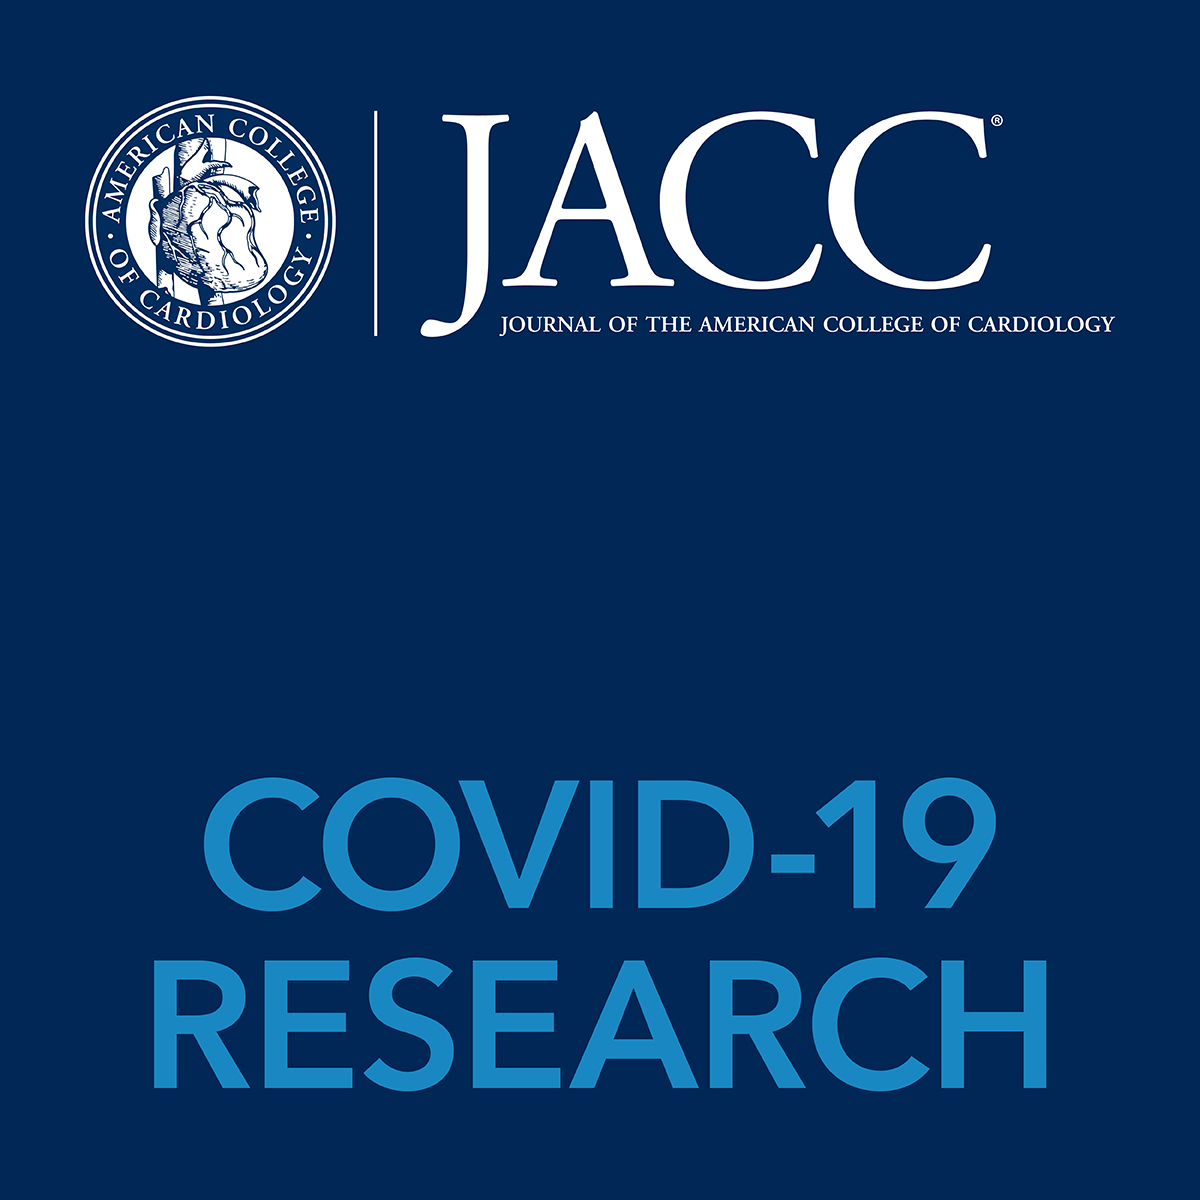 Click here to visit JACC's COVID-19 Hub.